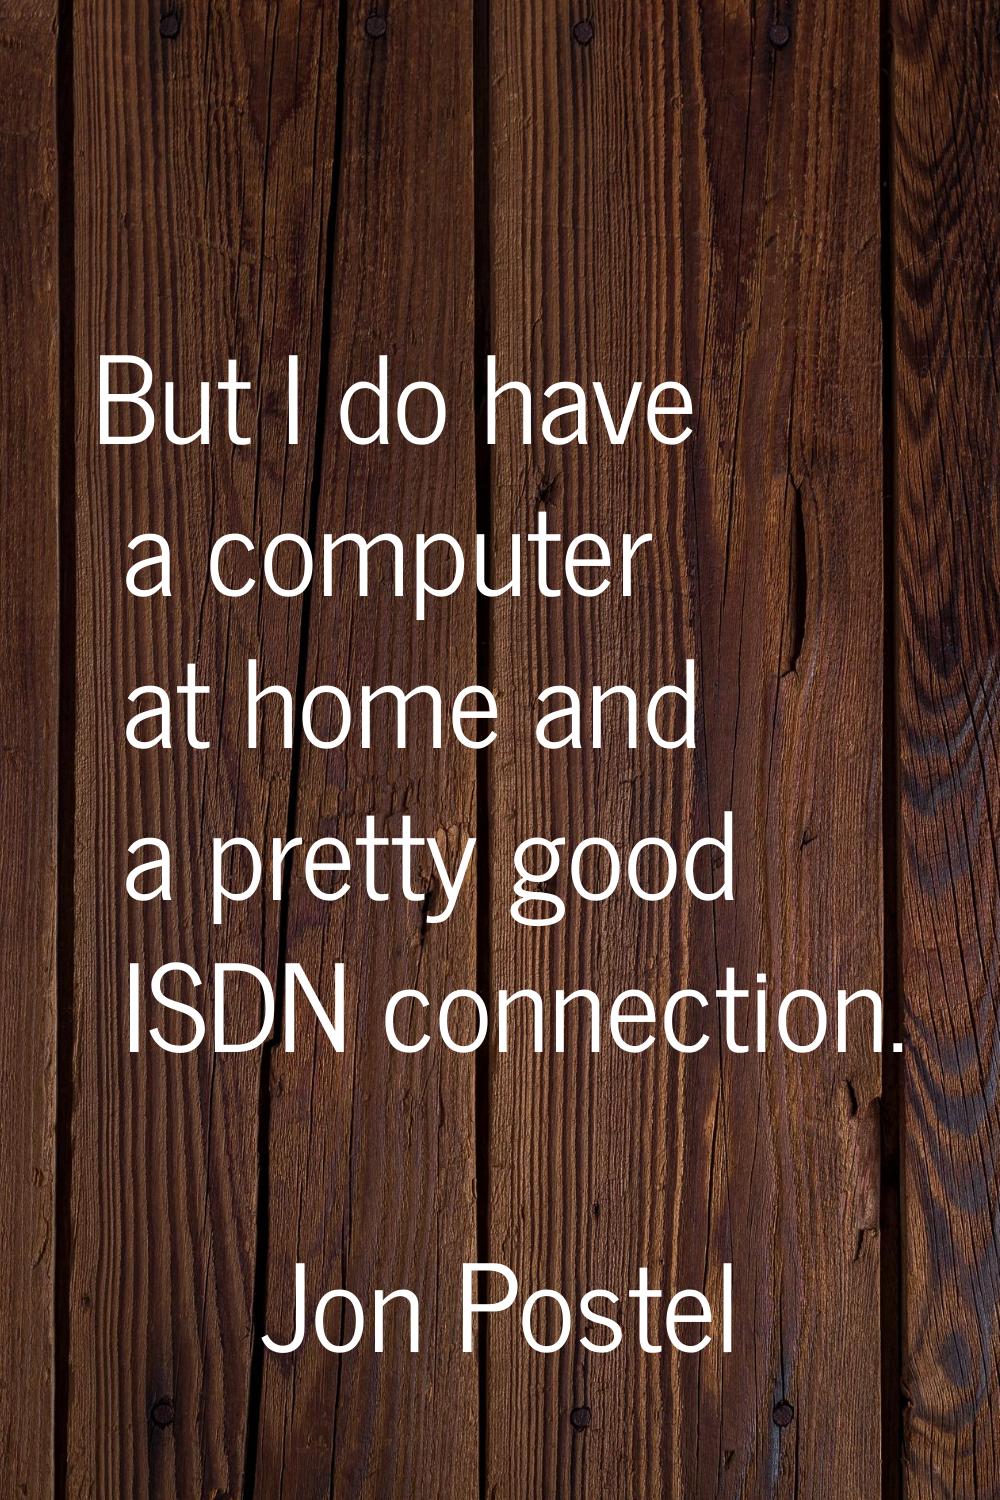 But I do have a computer at home and a pretty good ISDN connection.